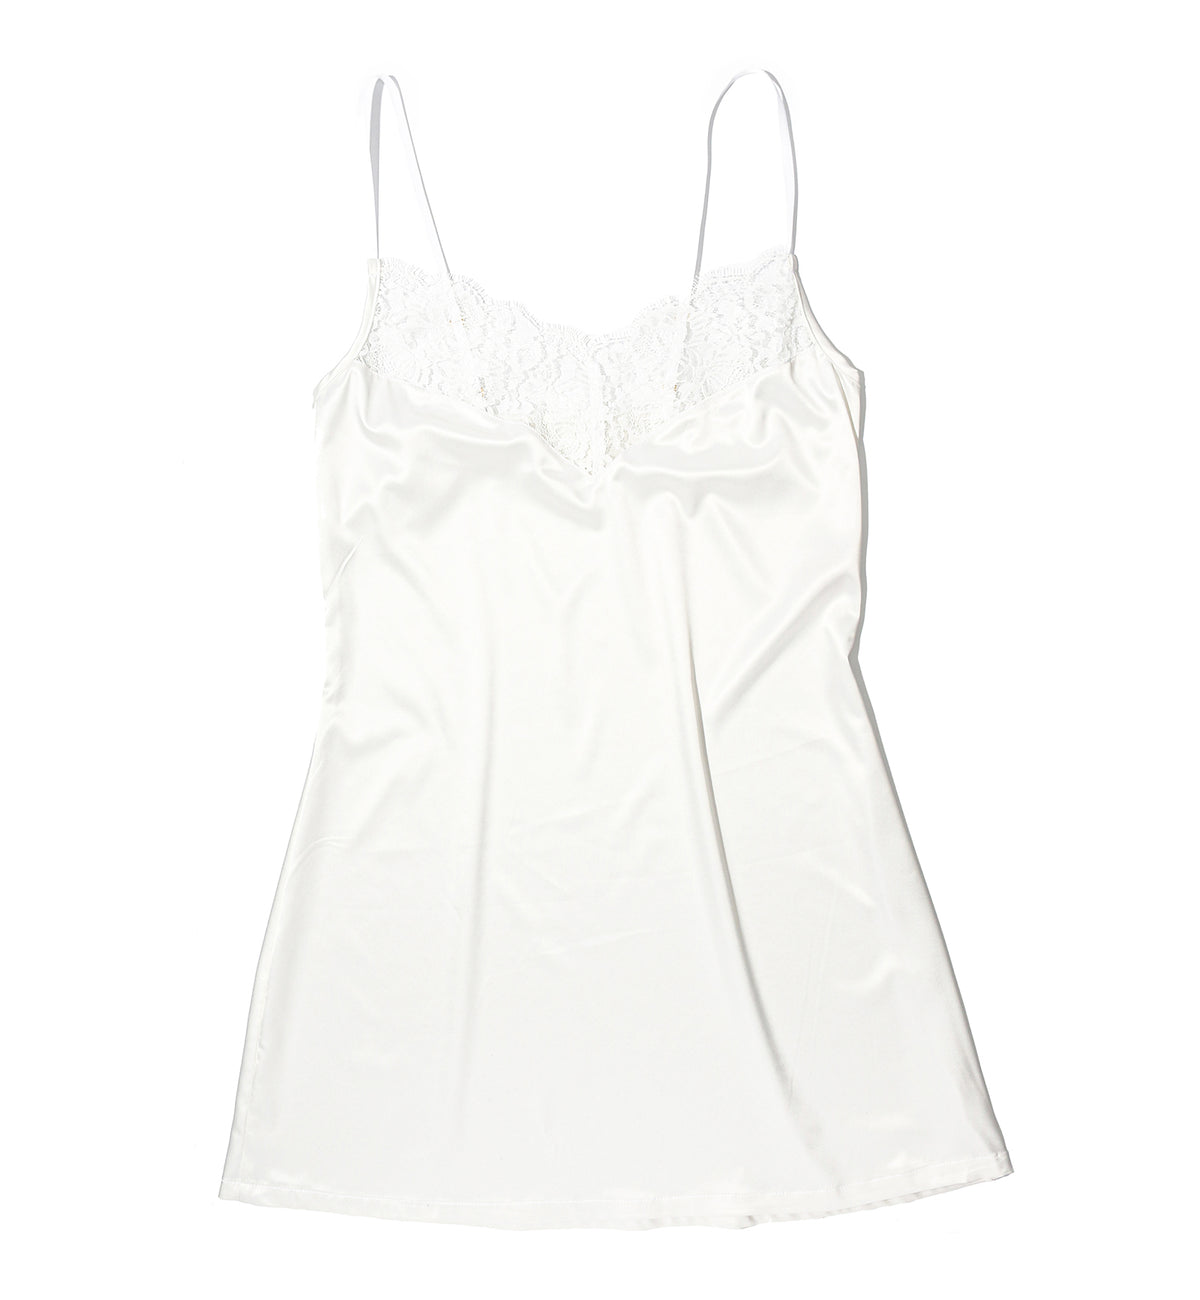 Hanky Panky Bridal Happily Ever After Chemise (4R5701),XS,Light Ivory - Light Ivory,XS